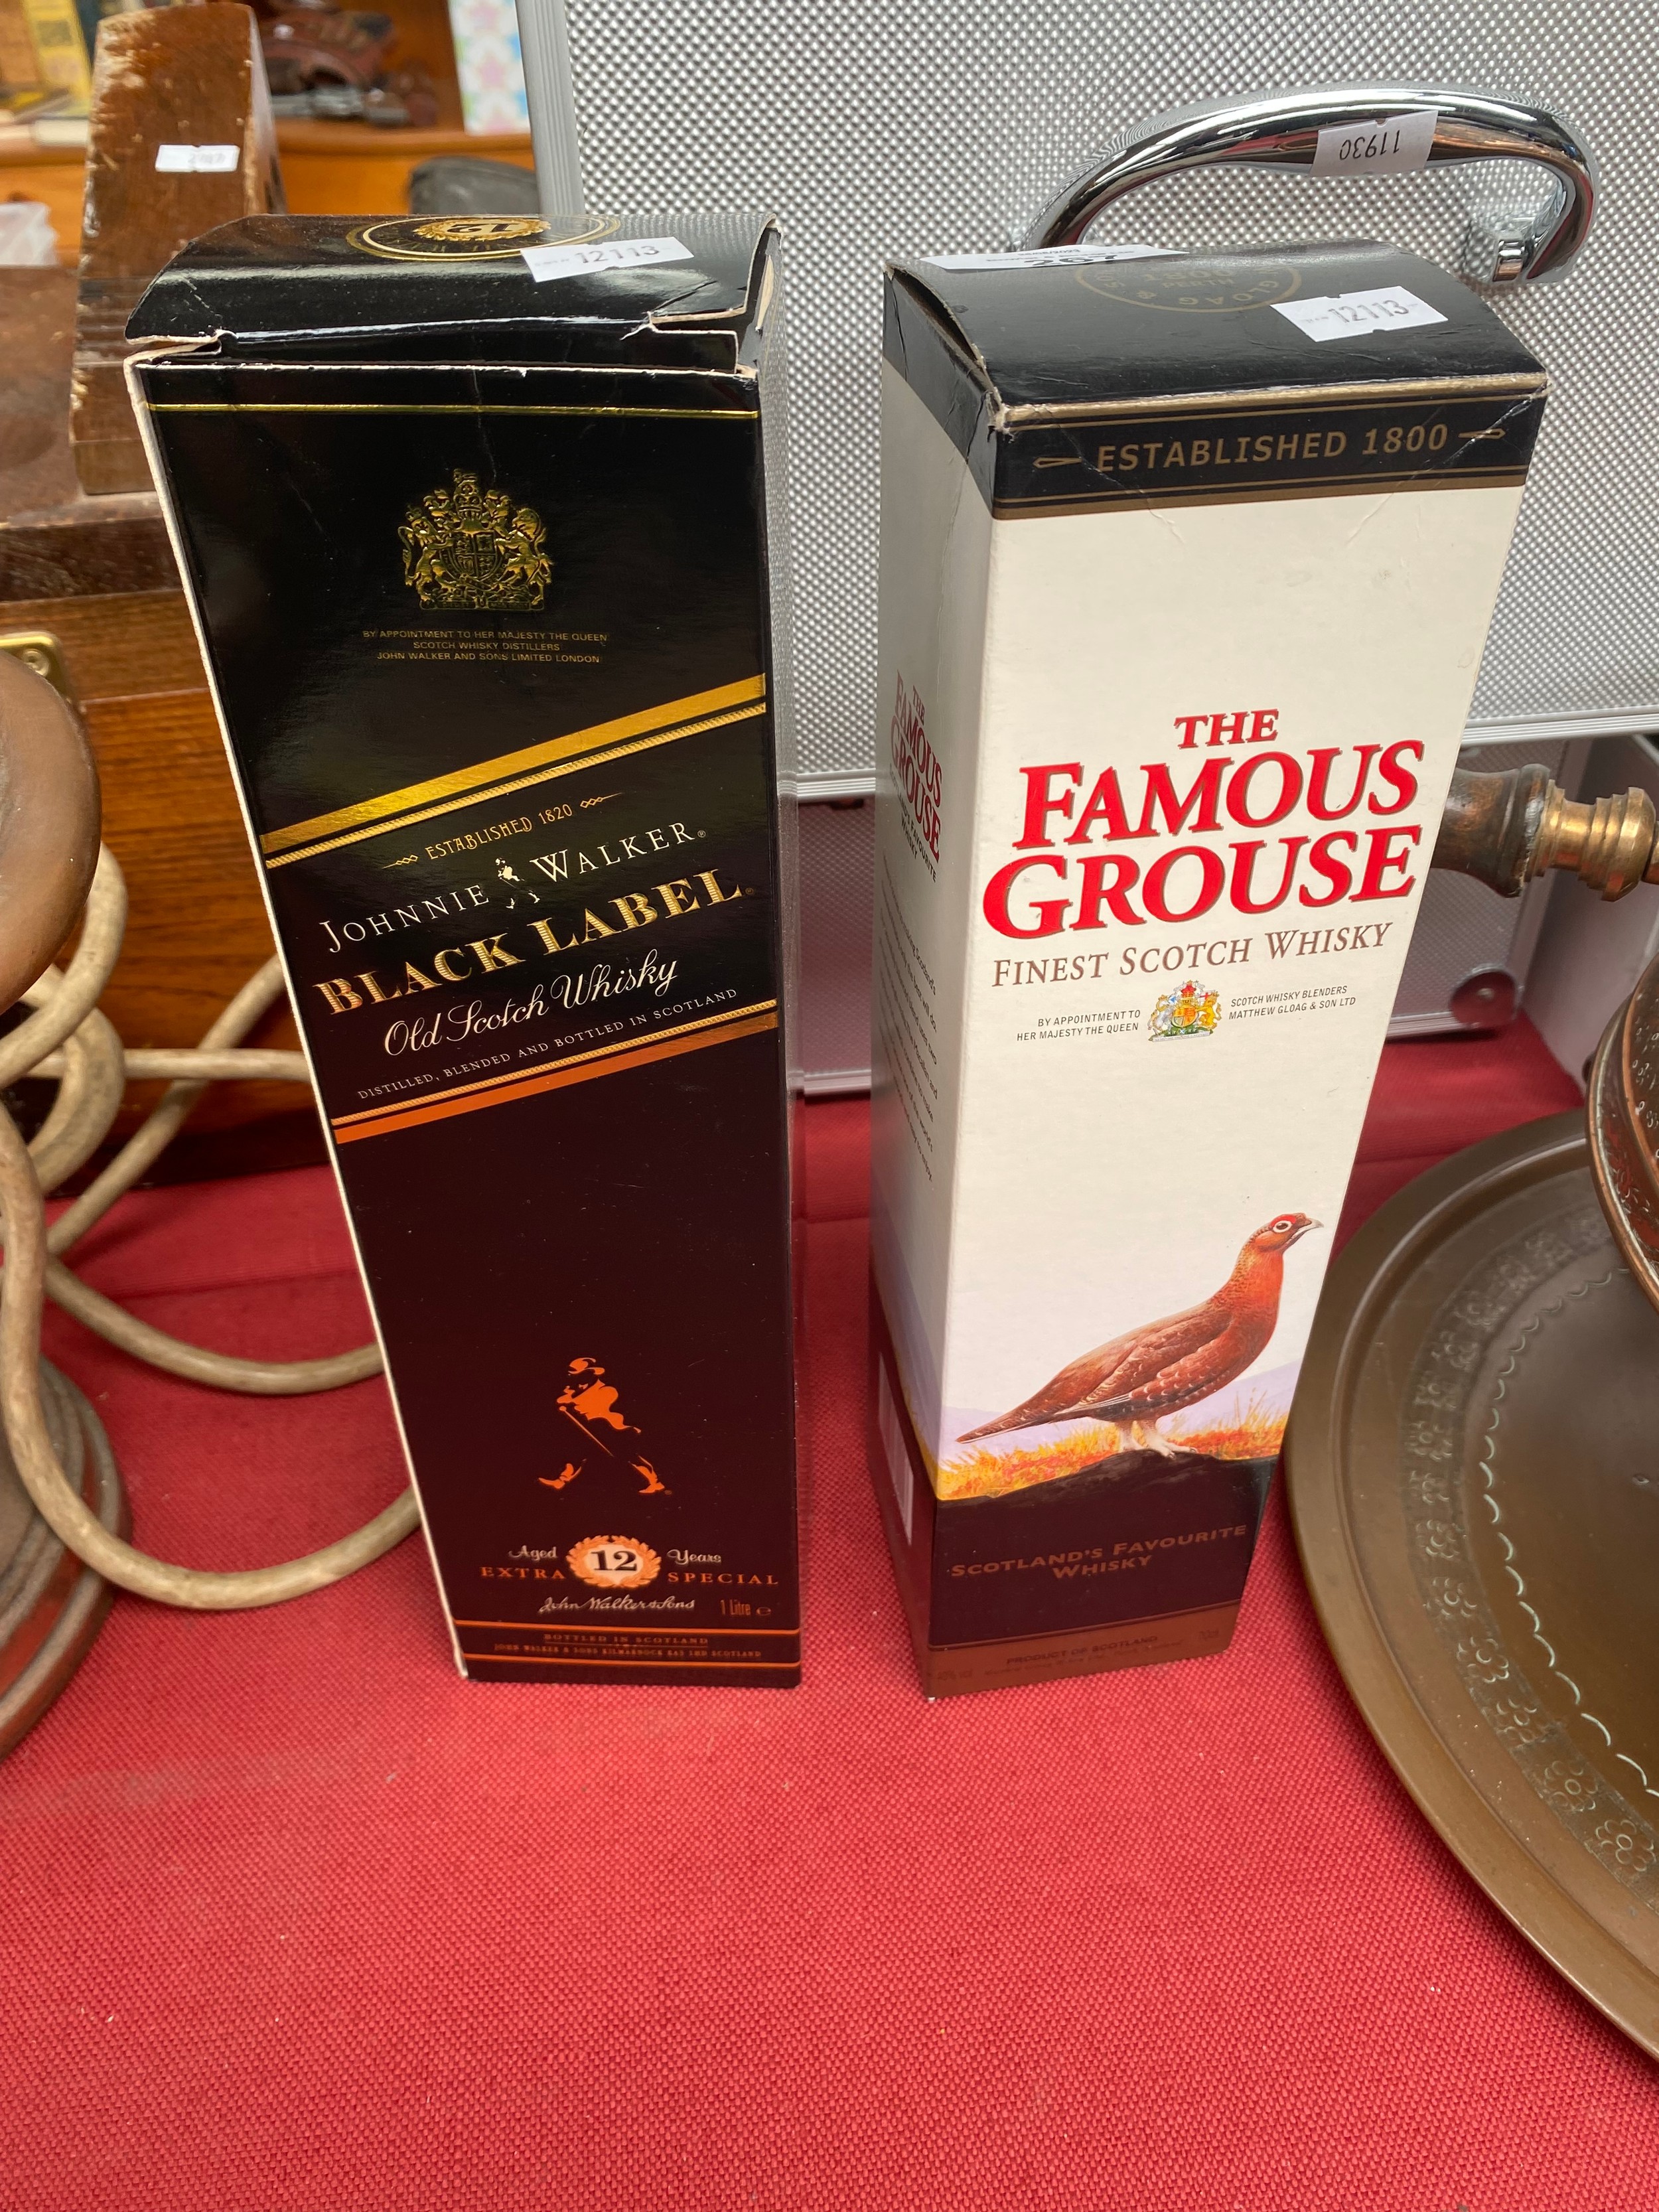 A bottle of Black label johnny walker old scotch whisky along with The Famous grouse scotch whisky